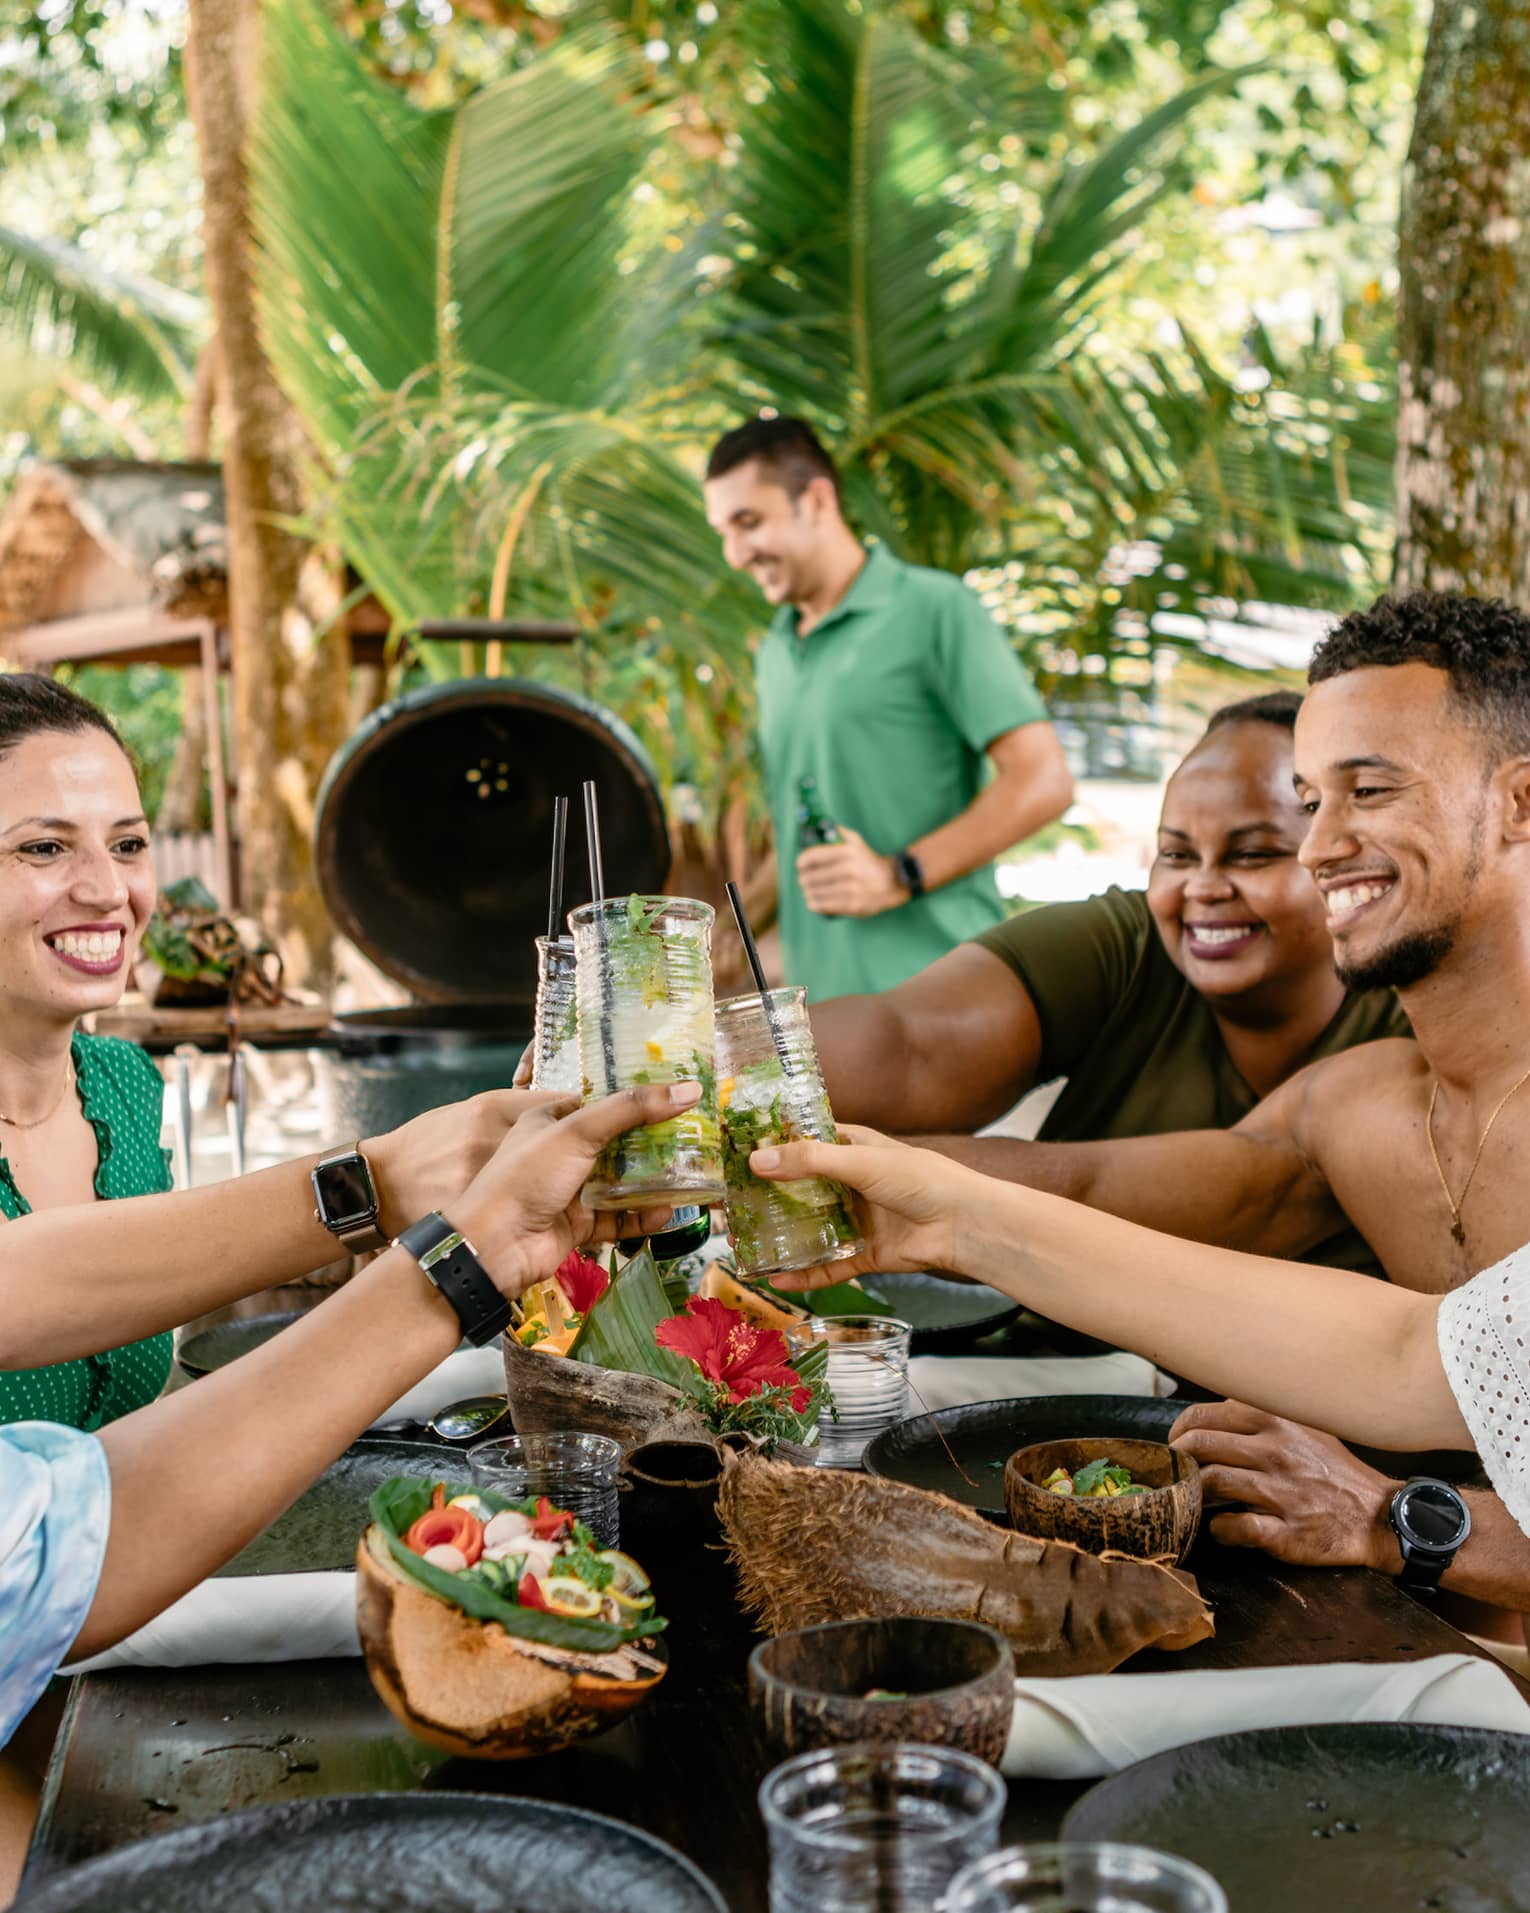 Five friends smiling and clinking glasses over outdoor barbecue lunch in tropical setting